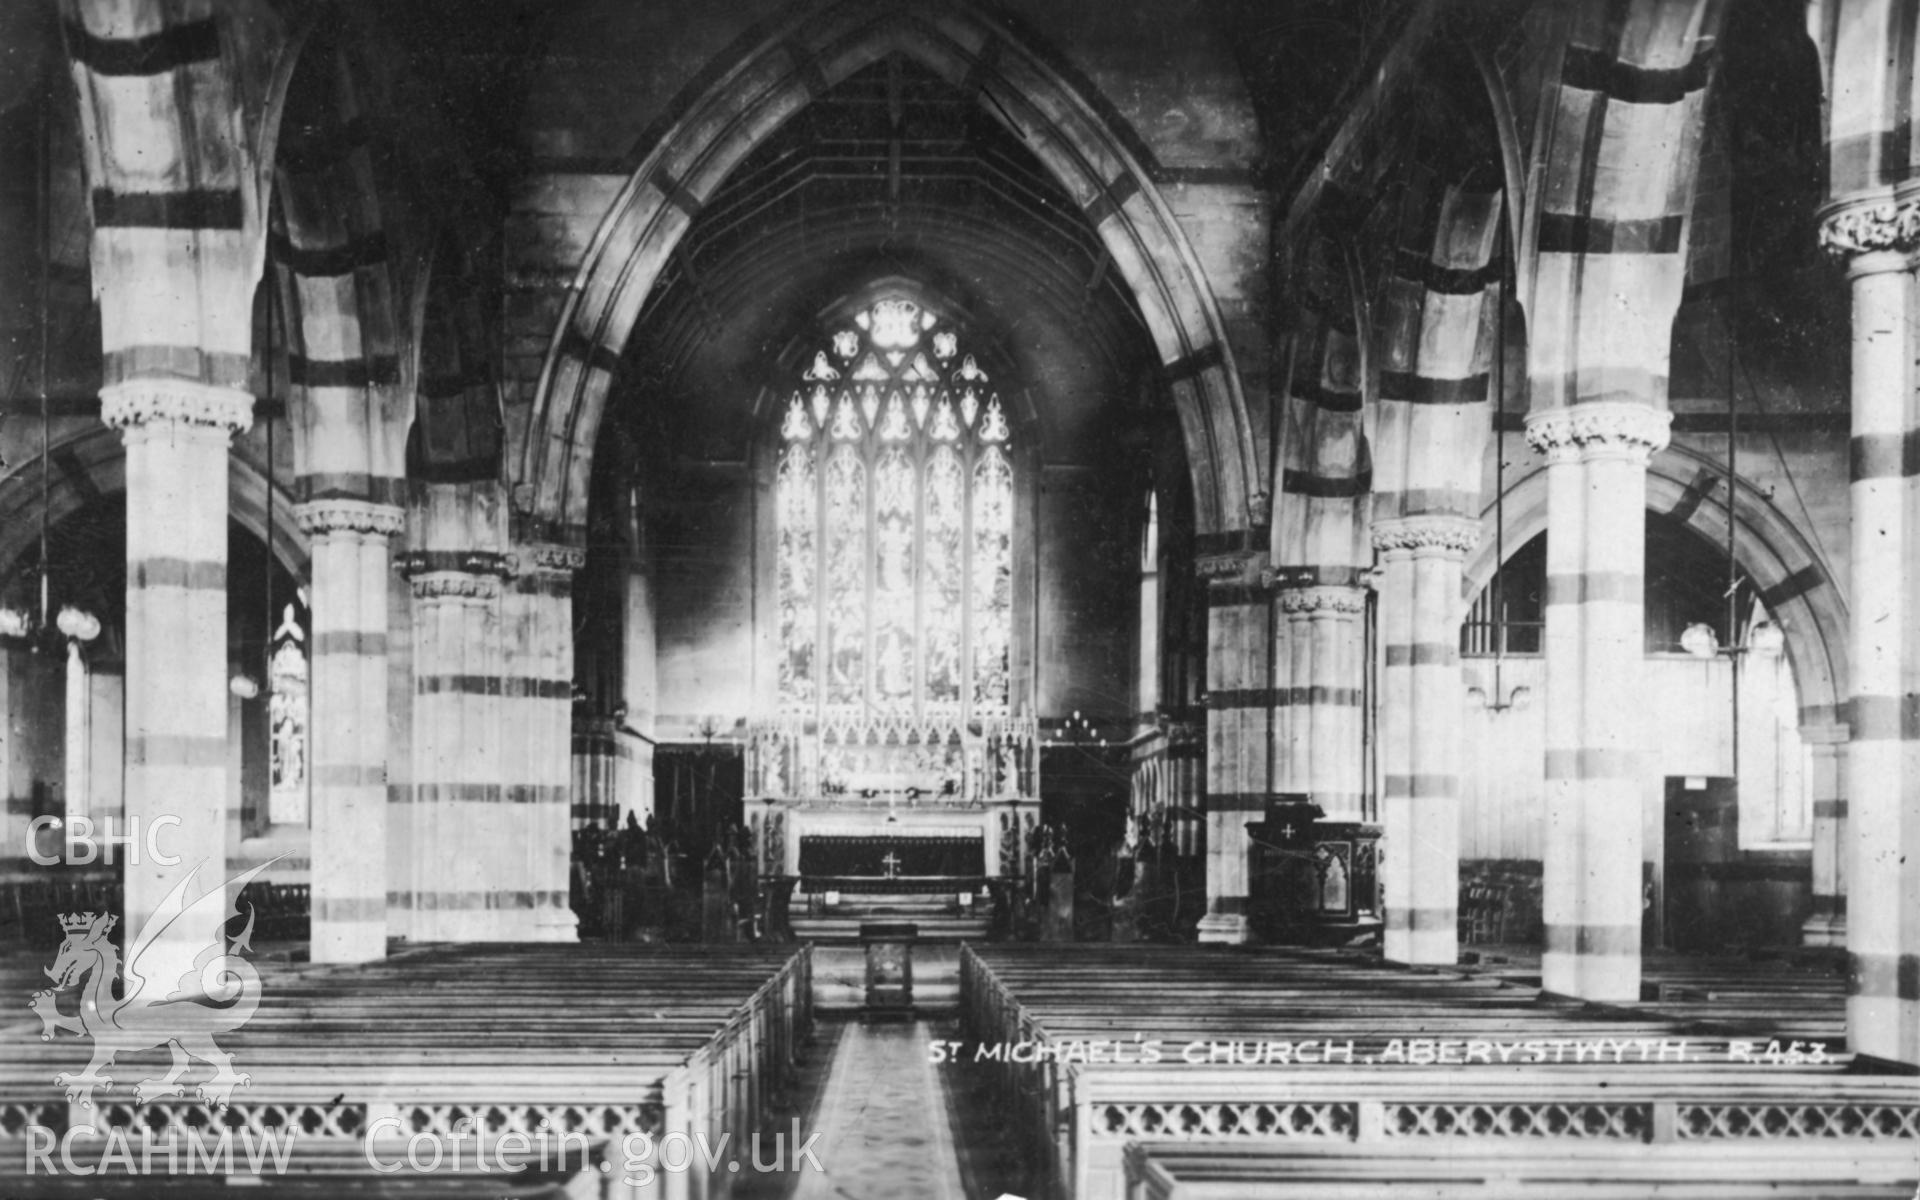 Digital copy of postcard showing interior of St Michael's church, Aberystwyth, dated early 20th c. Loaned for copying by Charlie Downes